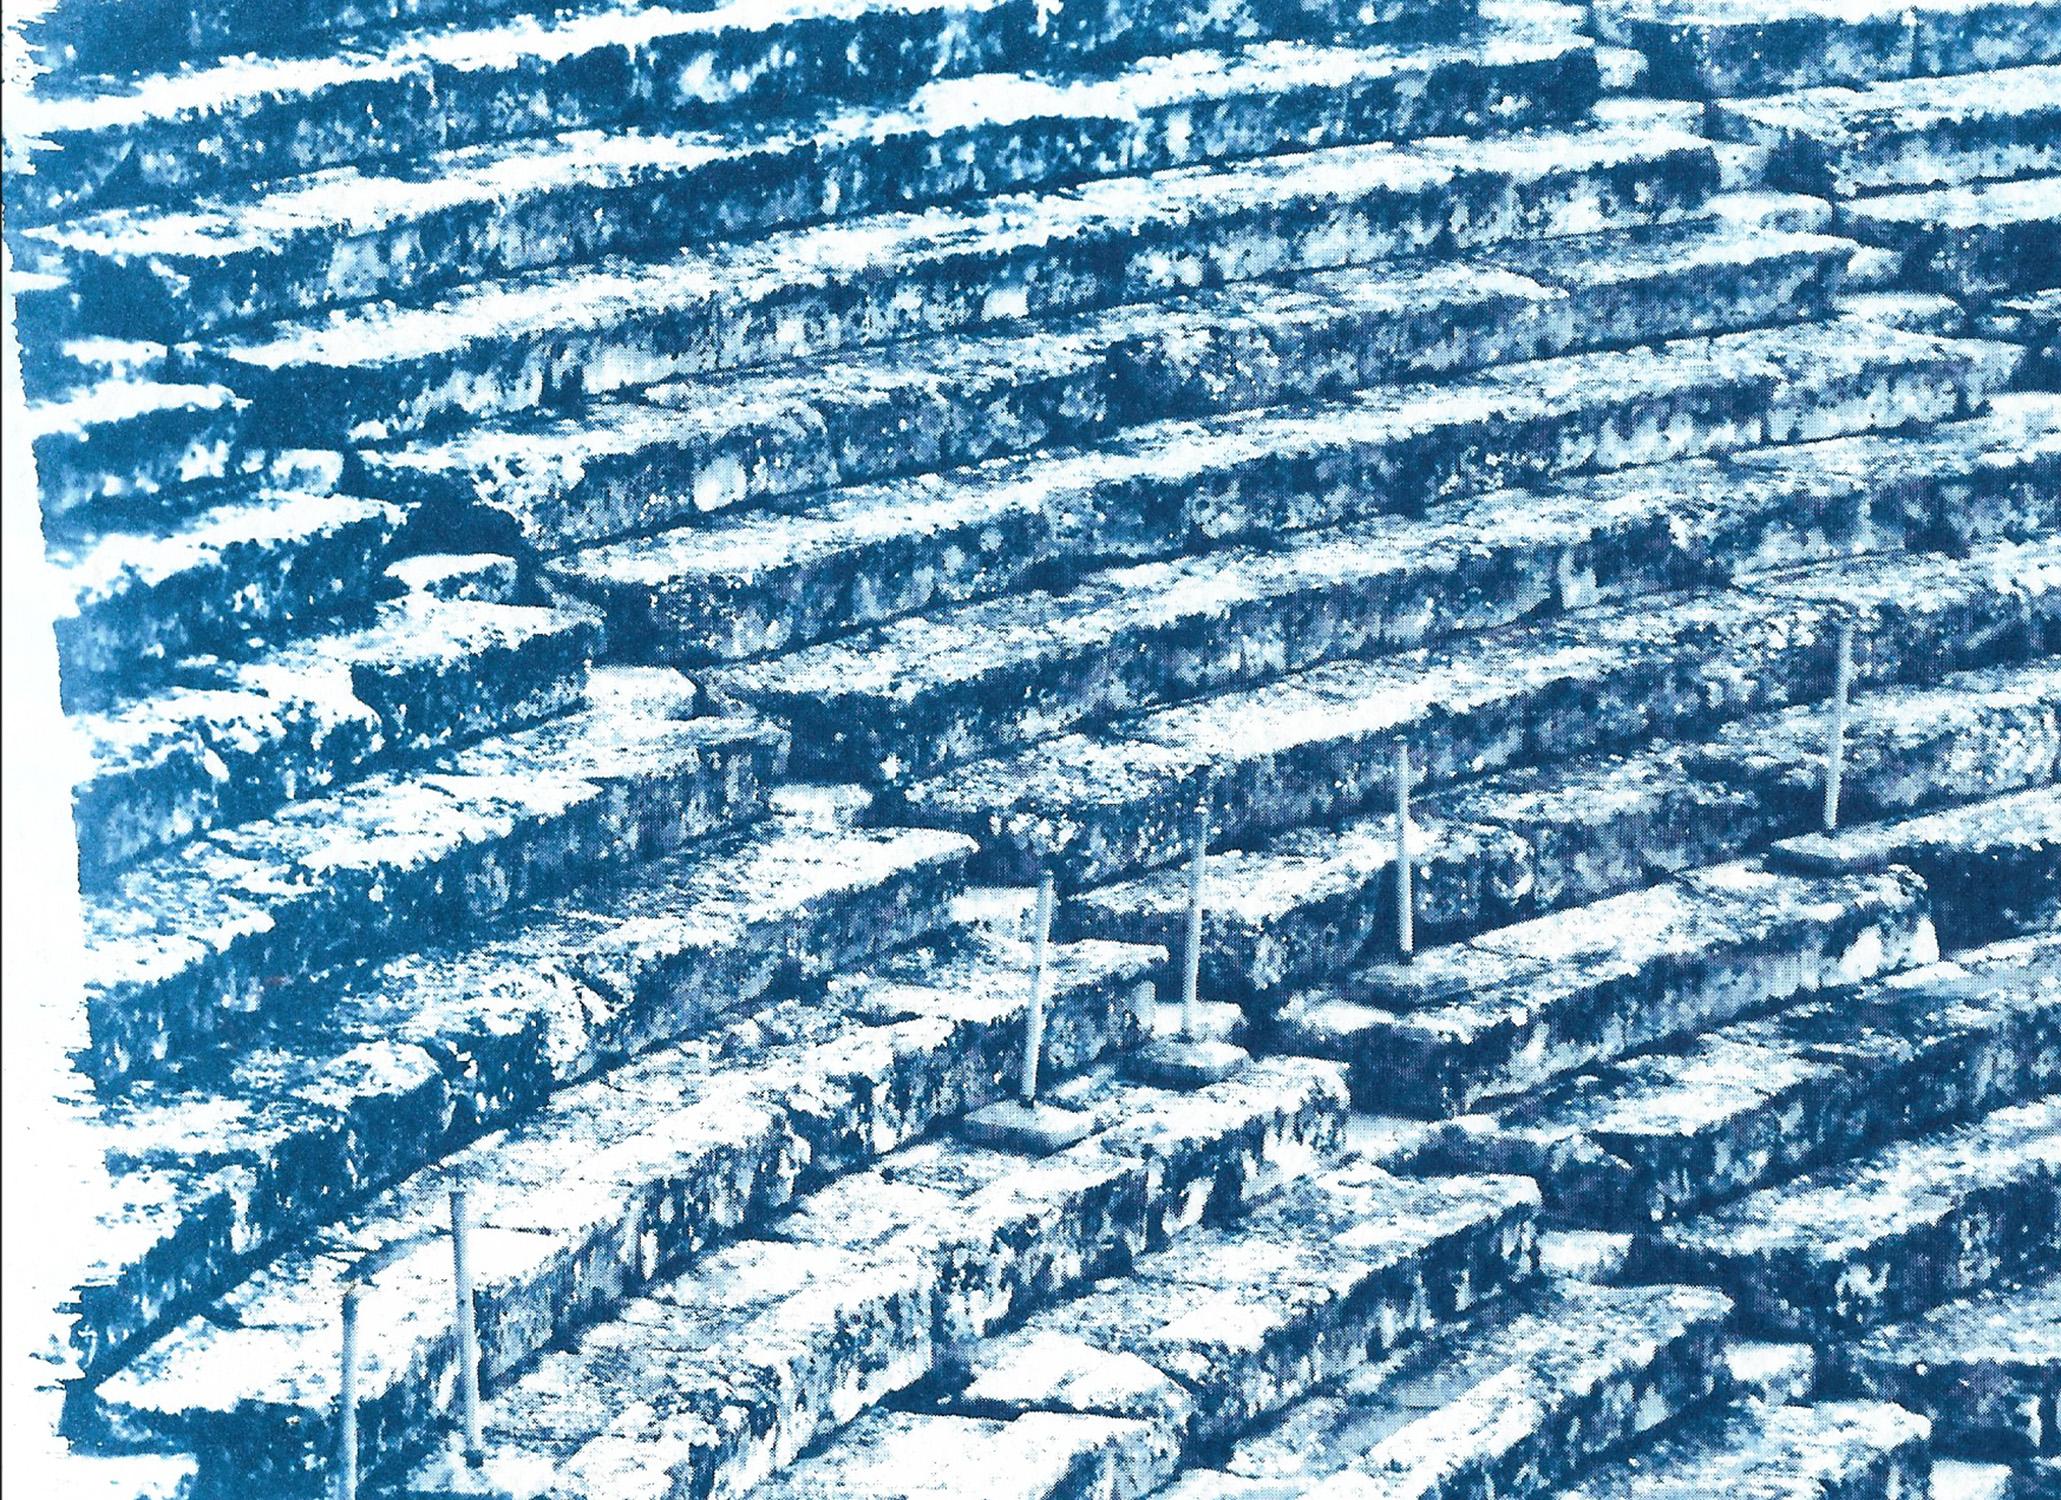 This is an exclusive handprinted limited edition cyanotype.

Details:
+ Title: Diptych of Ancient Theaters
+ Year: 2020
+ Edition Size: 50
+ Stamped and Certificate of Authenticity provided
+ Measurements : Two panels of 70x100 cm (28x 40 in.), a